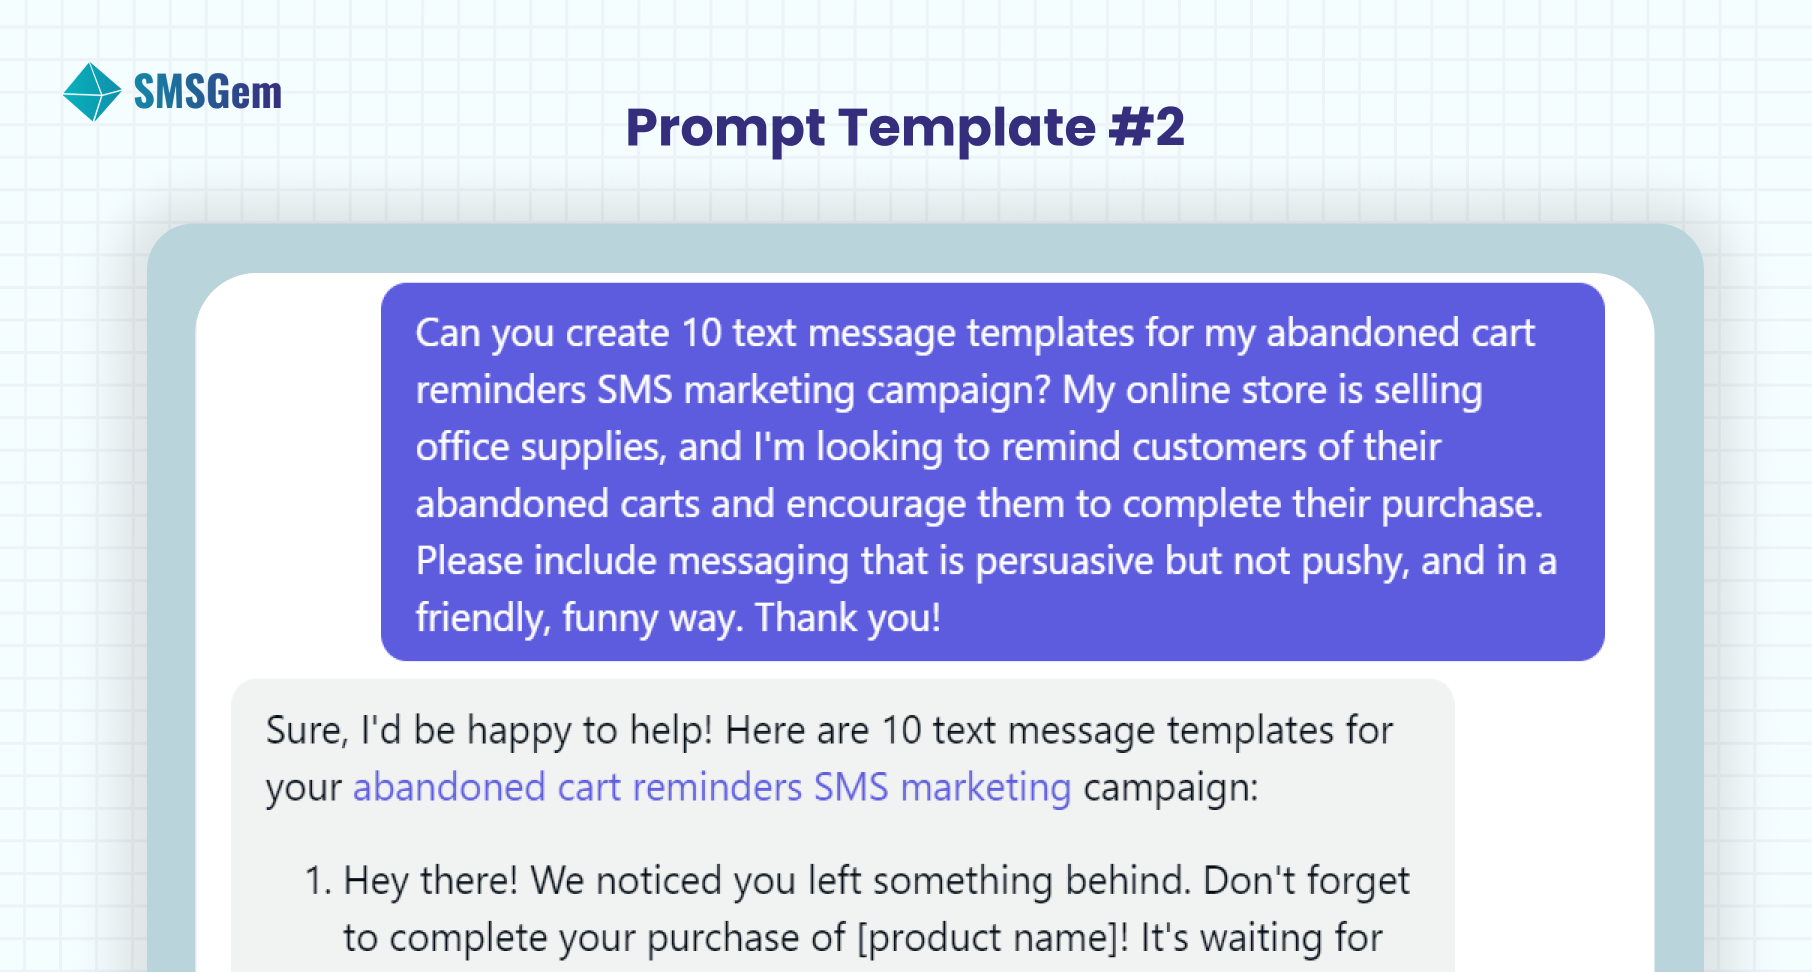 CHatGPT Prompt for SMS Marketing